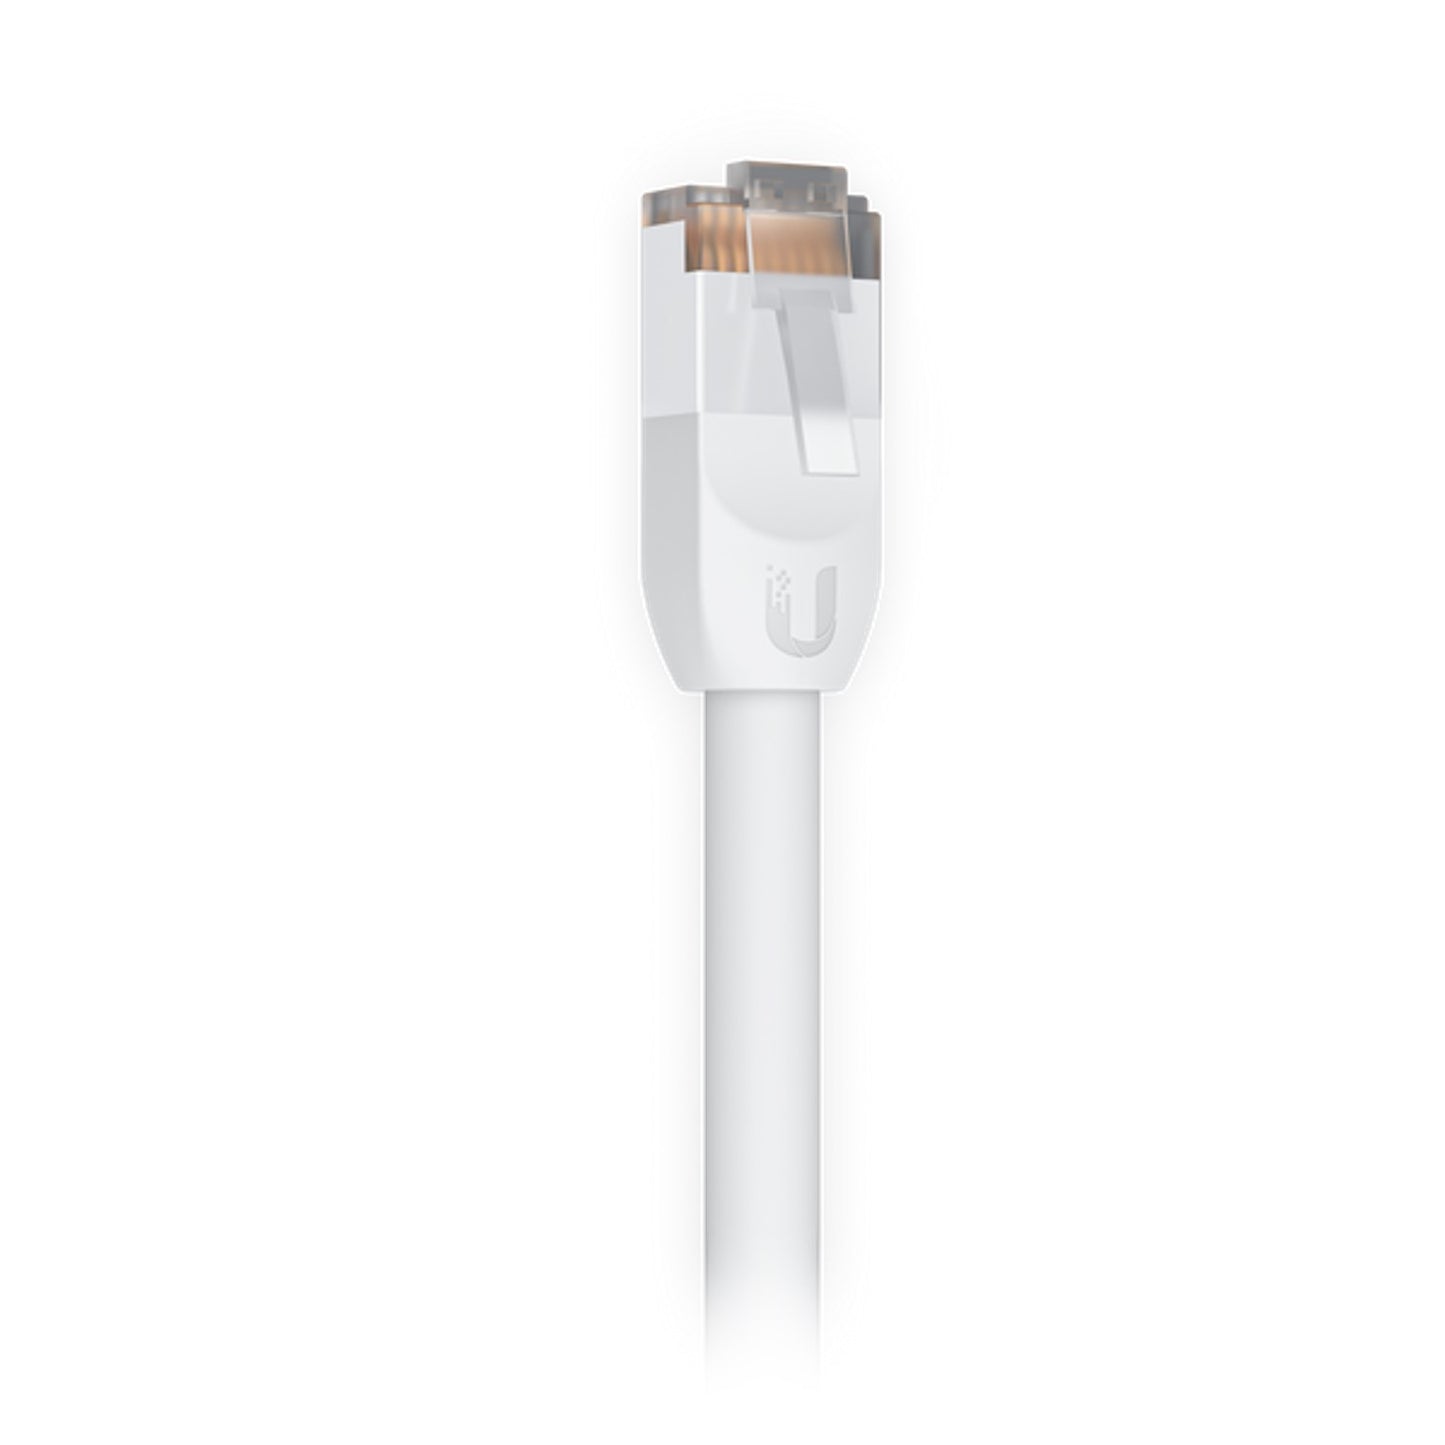 Ubiquiti UniFi Patch Cable Outdoor 5M White, Single Unit, All-weather, RJ45 Ethernet Cable, Category 5e, 2Yr Warr UACC-Cable-Patch-Outdoor-5M-W